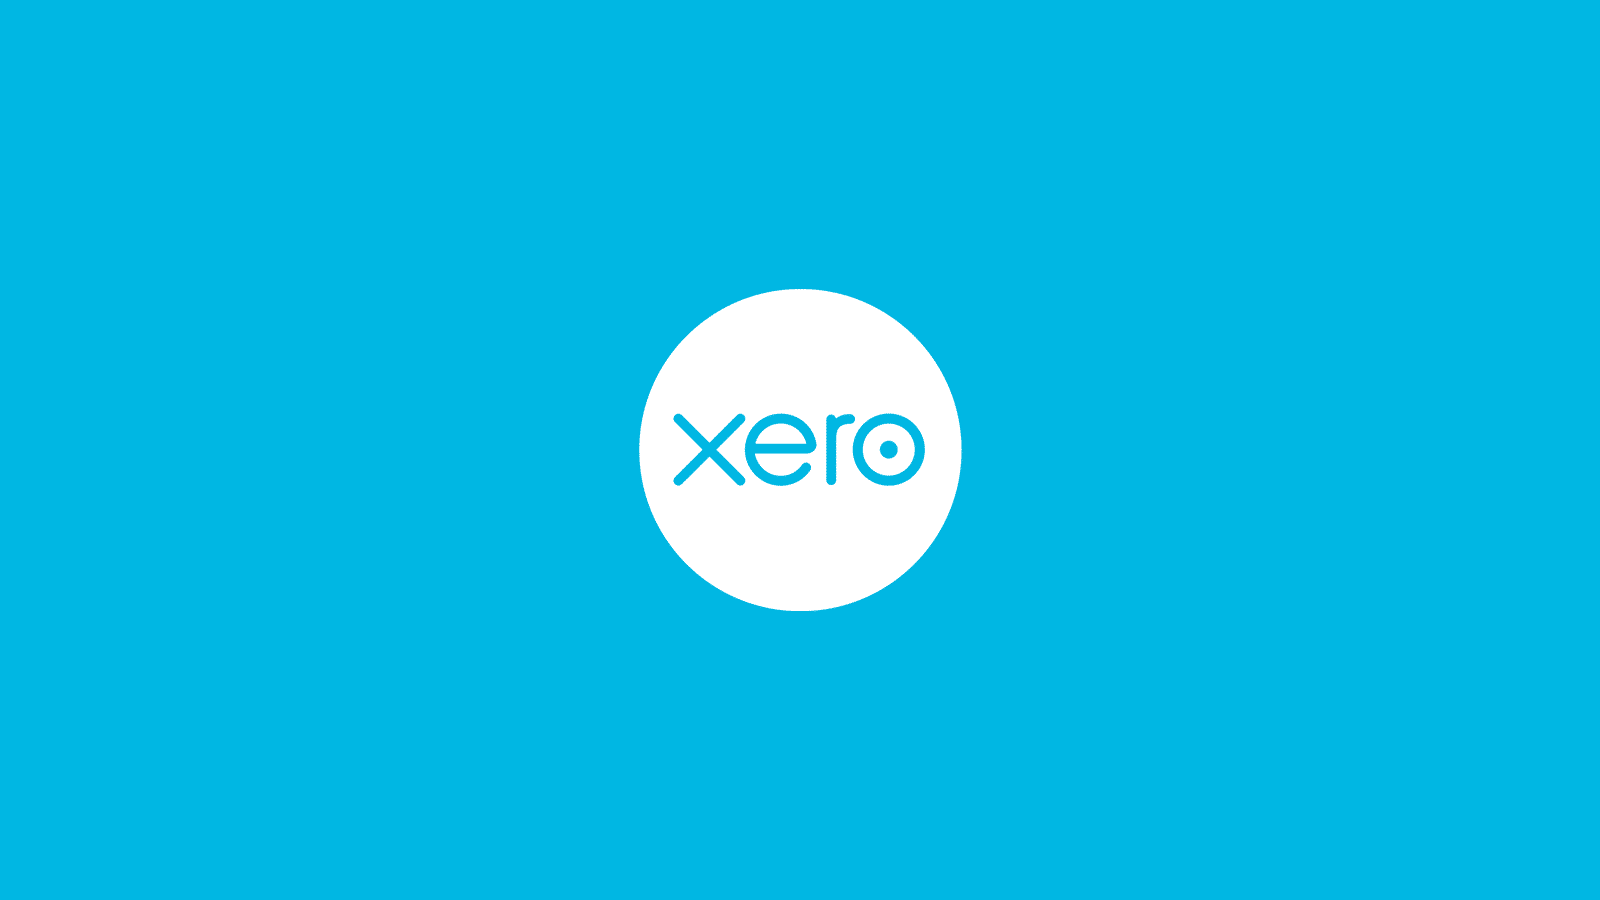 A Xero Tool that will help you Manage your Business!